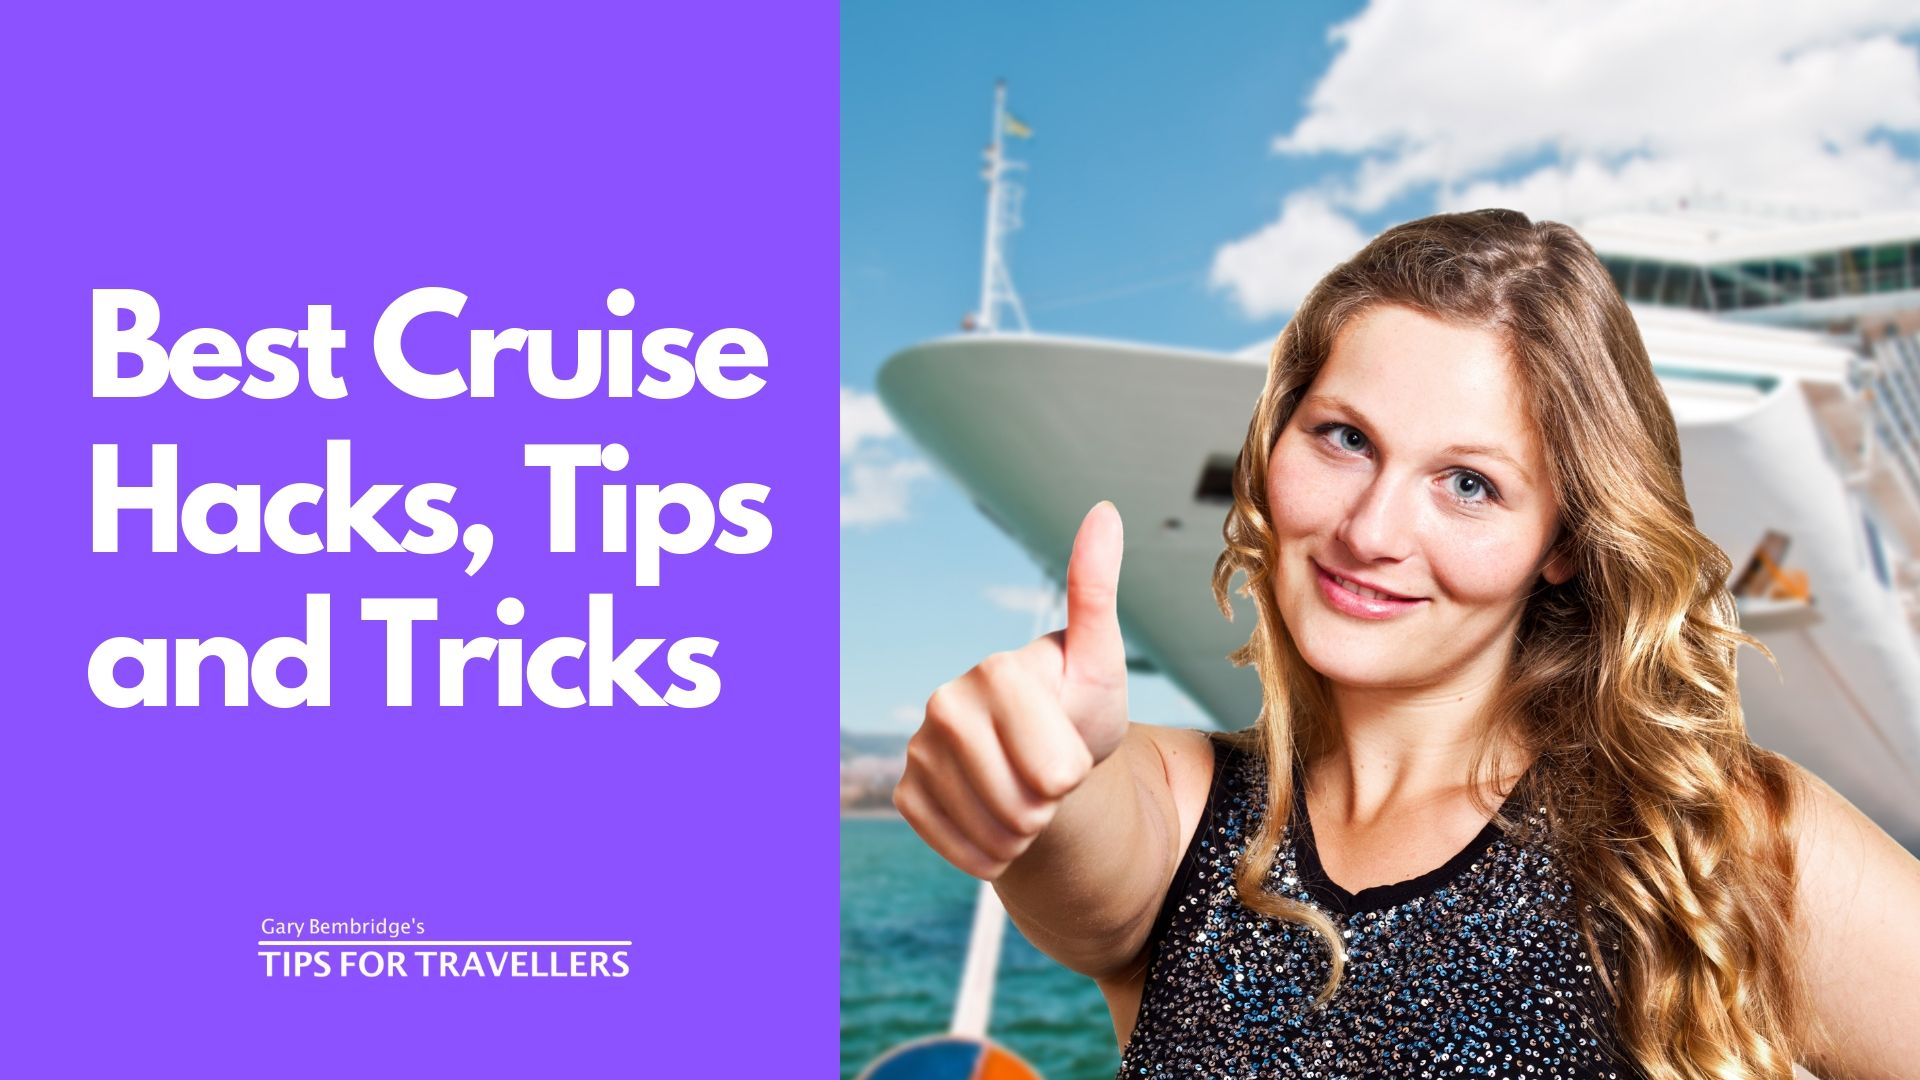 Cruise Hacks, Tips and Tricks